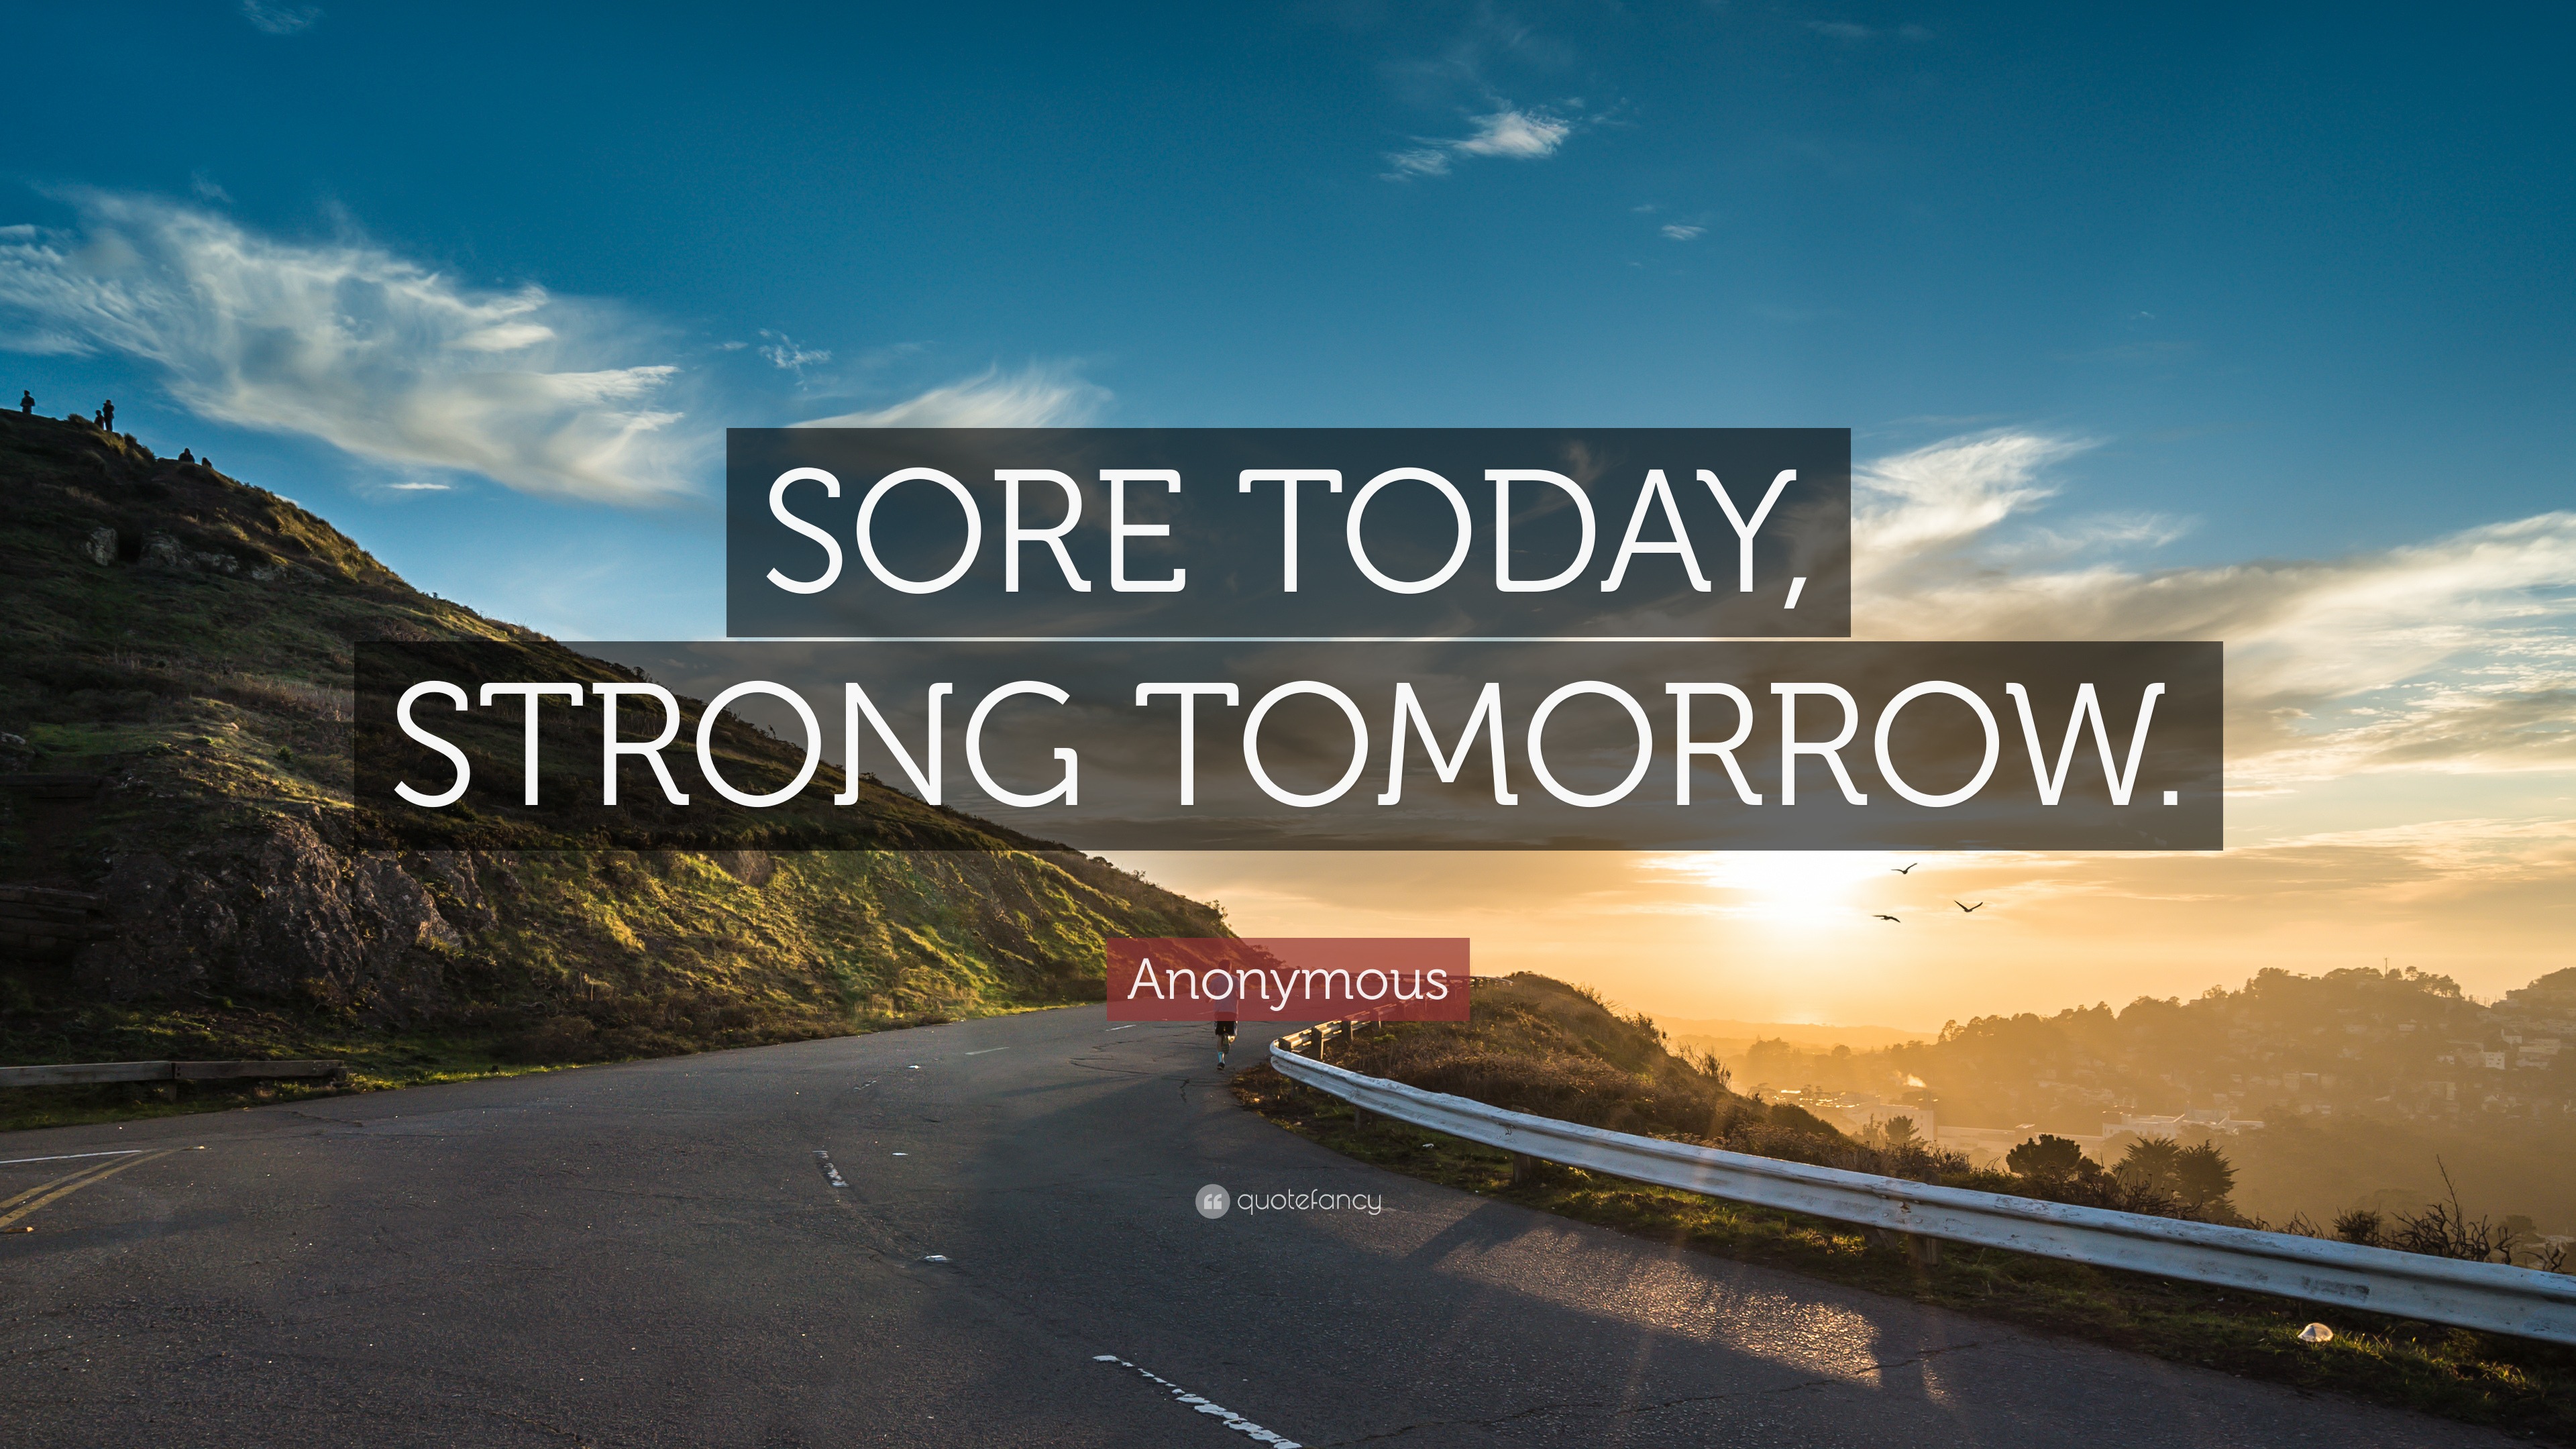 Inspiration Quote: Sore today, strong tomorrow